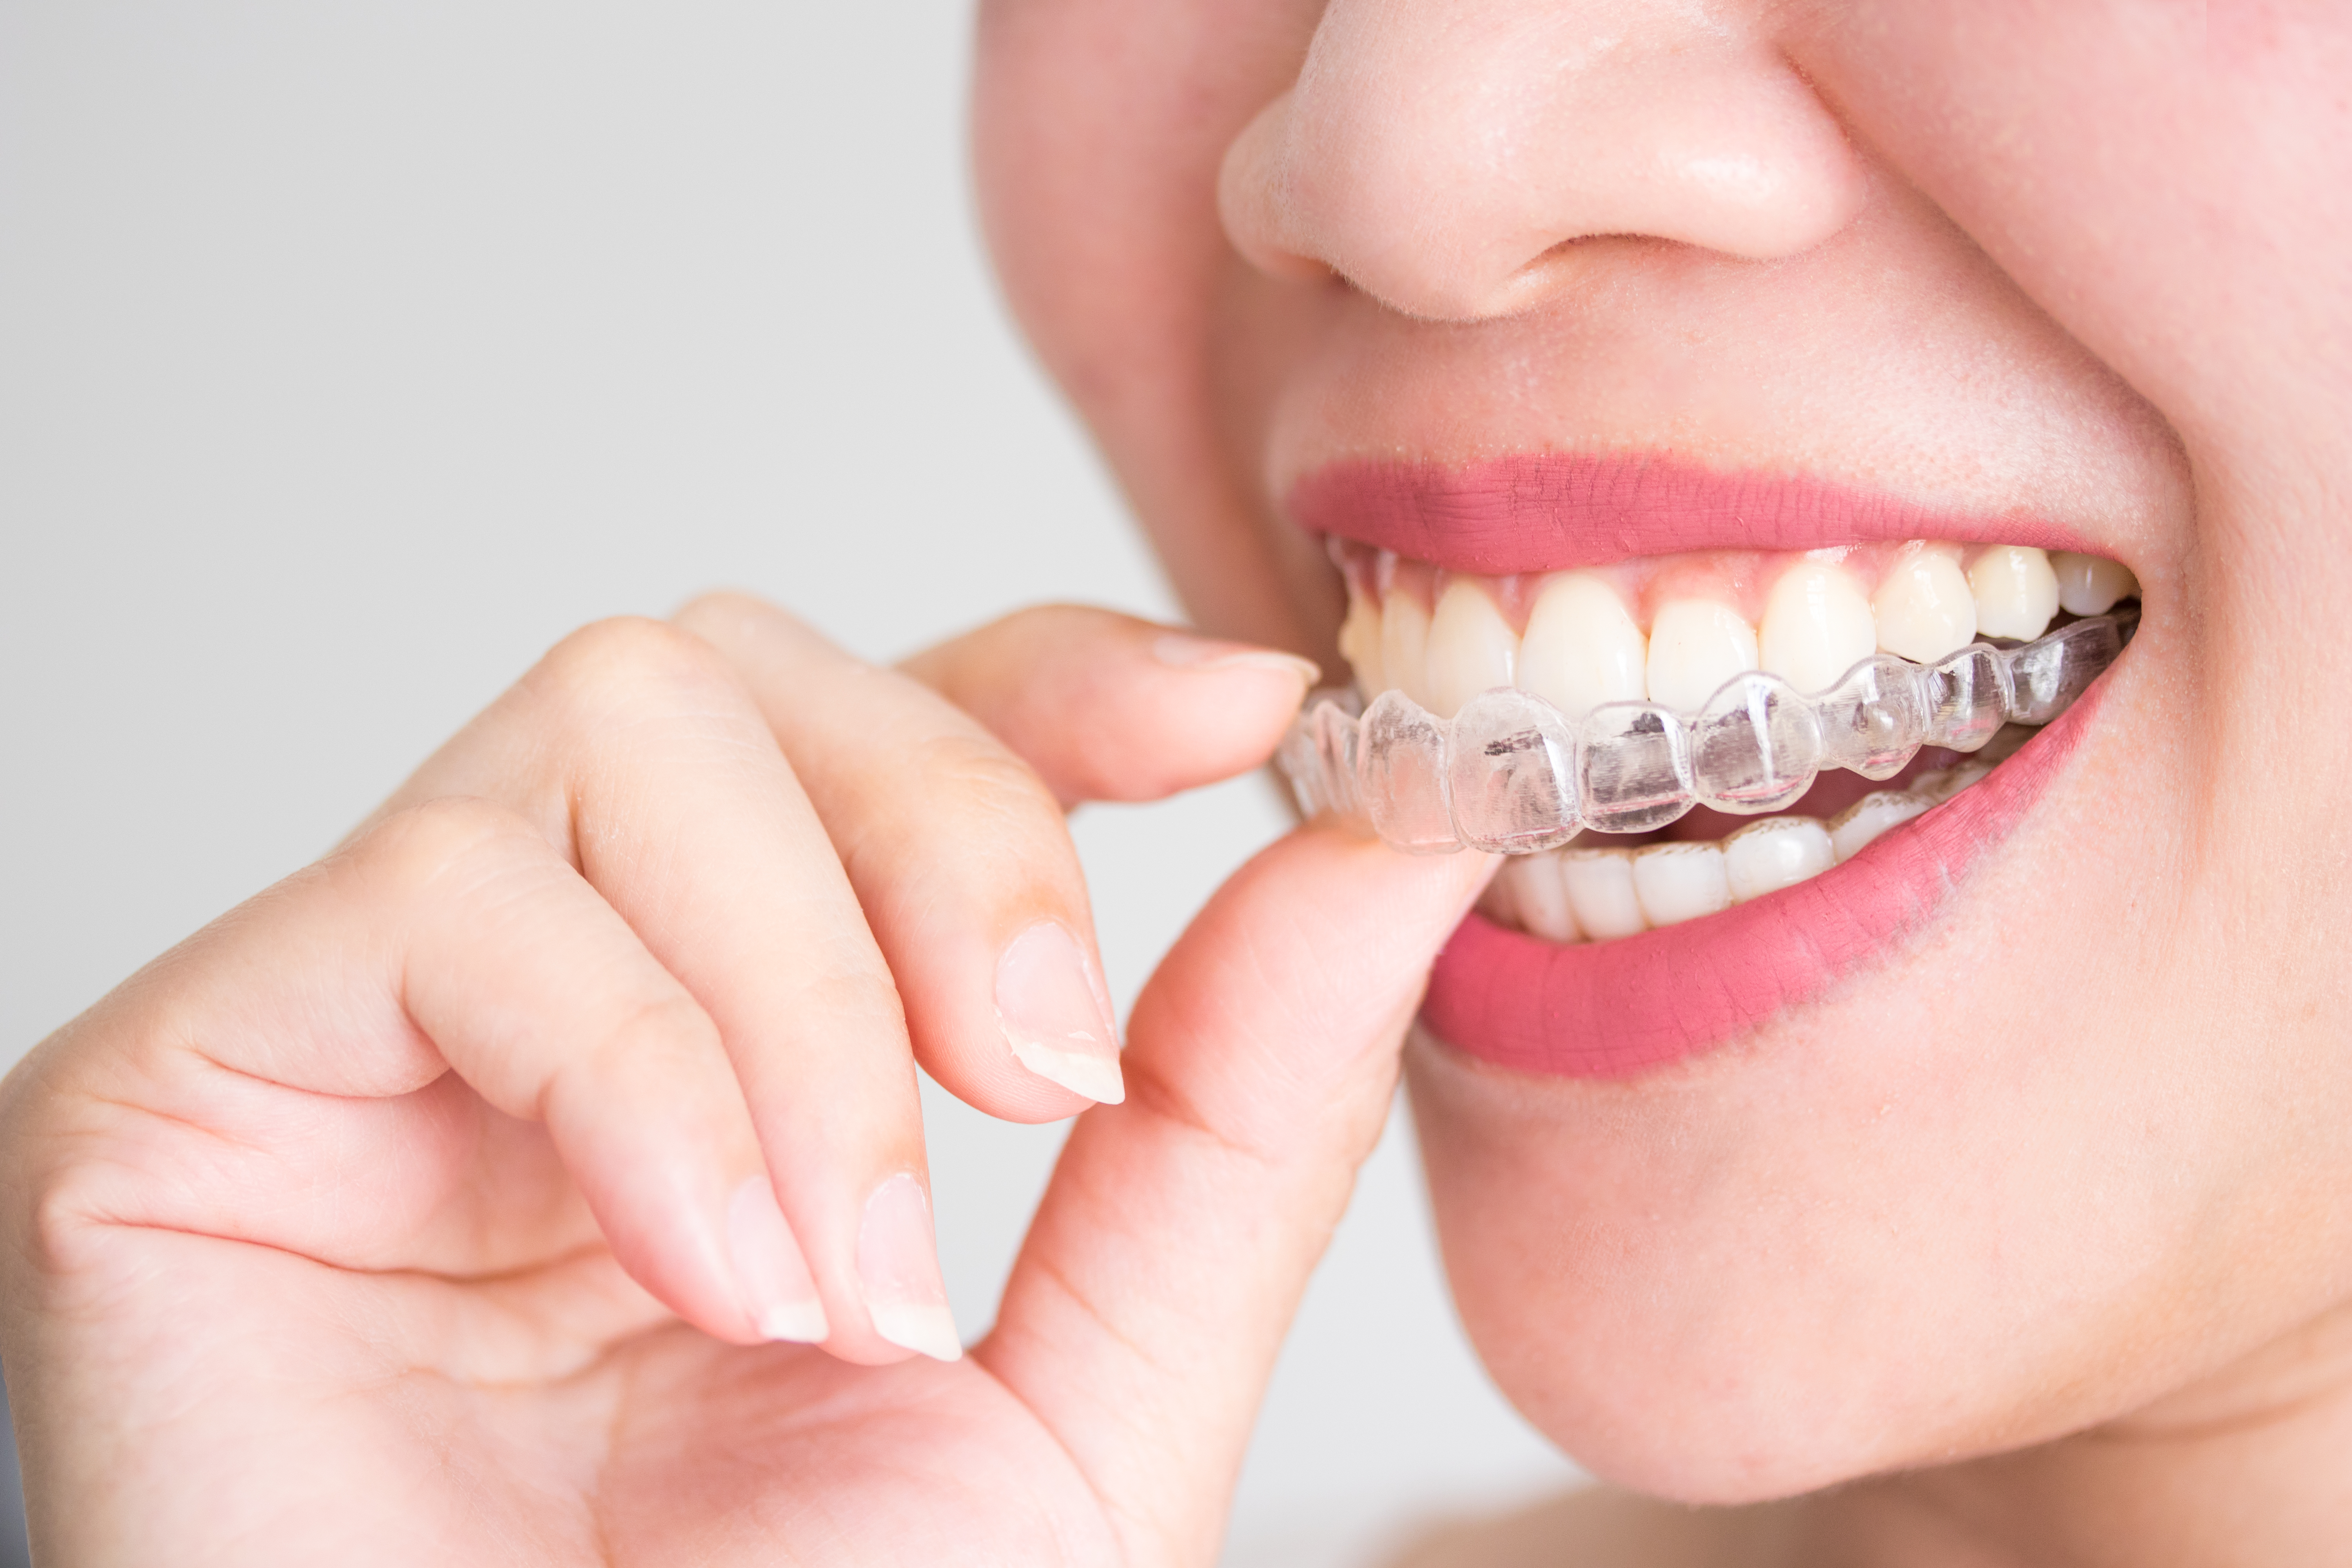 Invisalign Gap Between Tray And Teeth - Invisalign Express 2 Months Only To Close Front Gap Passamano Orthodontics / Invisalign is a great alternative to traditional braces to fix your smile.